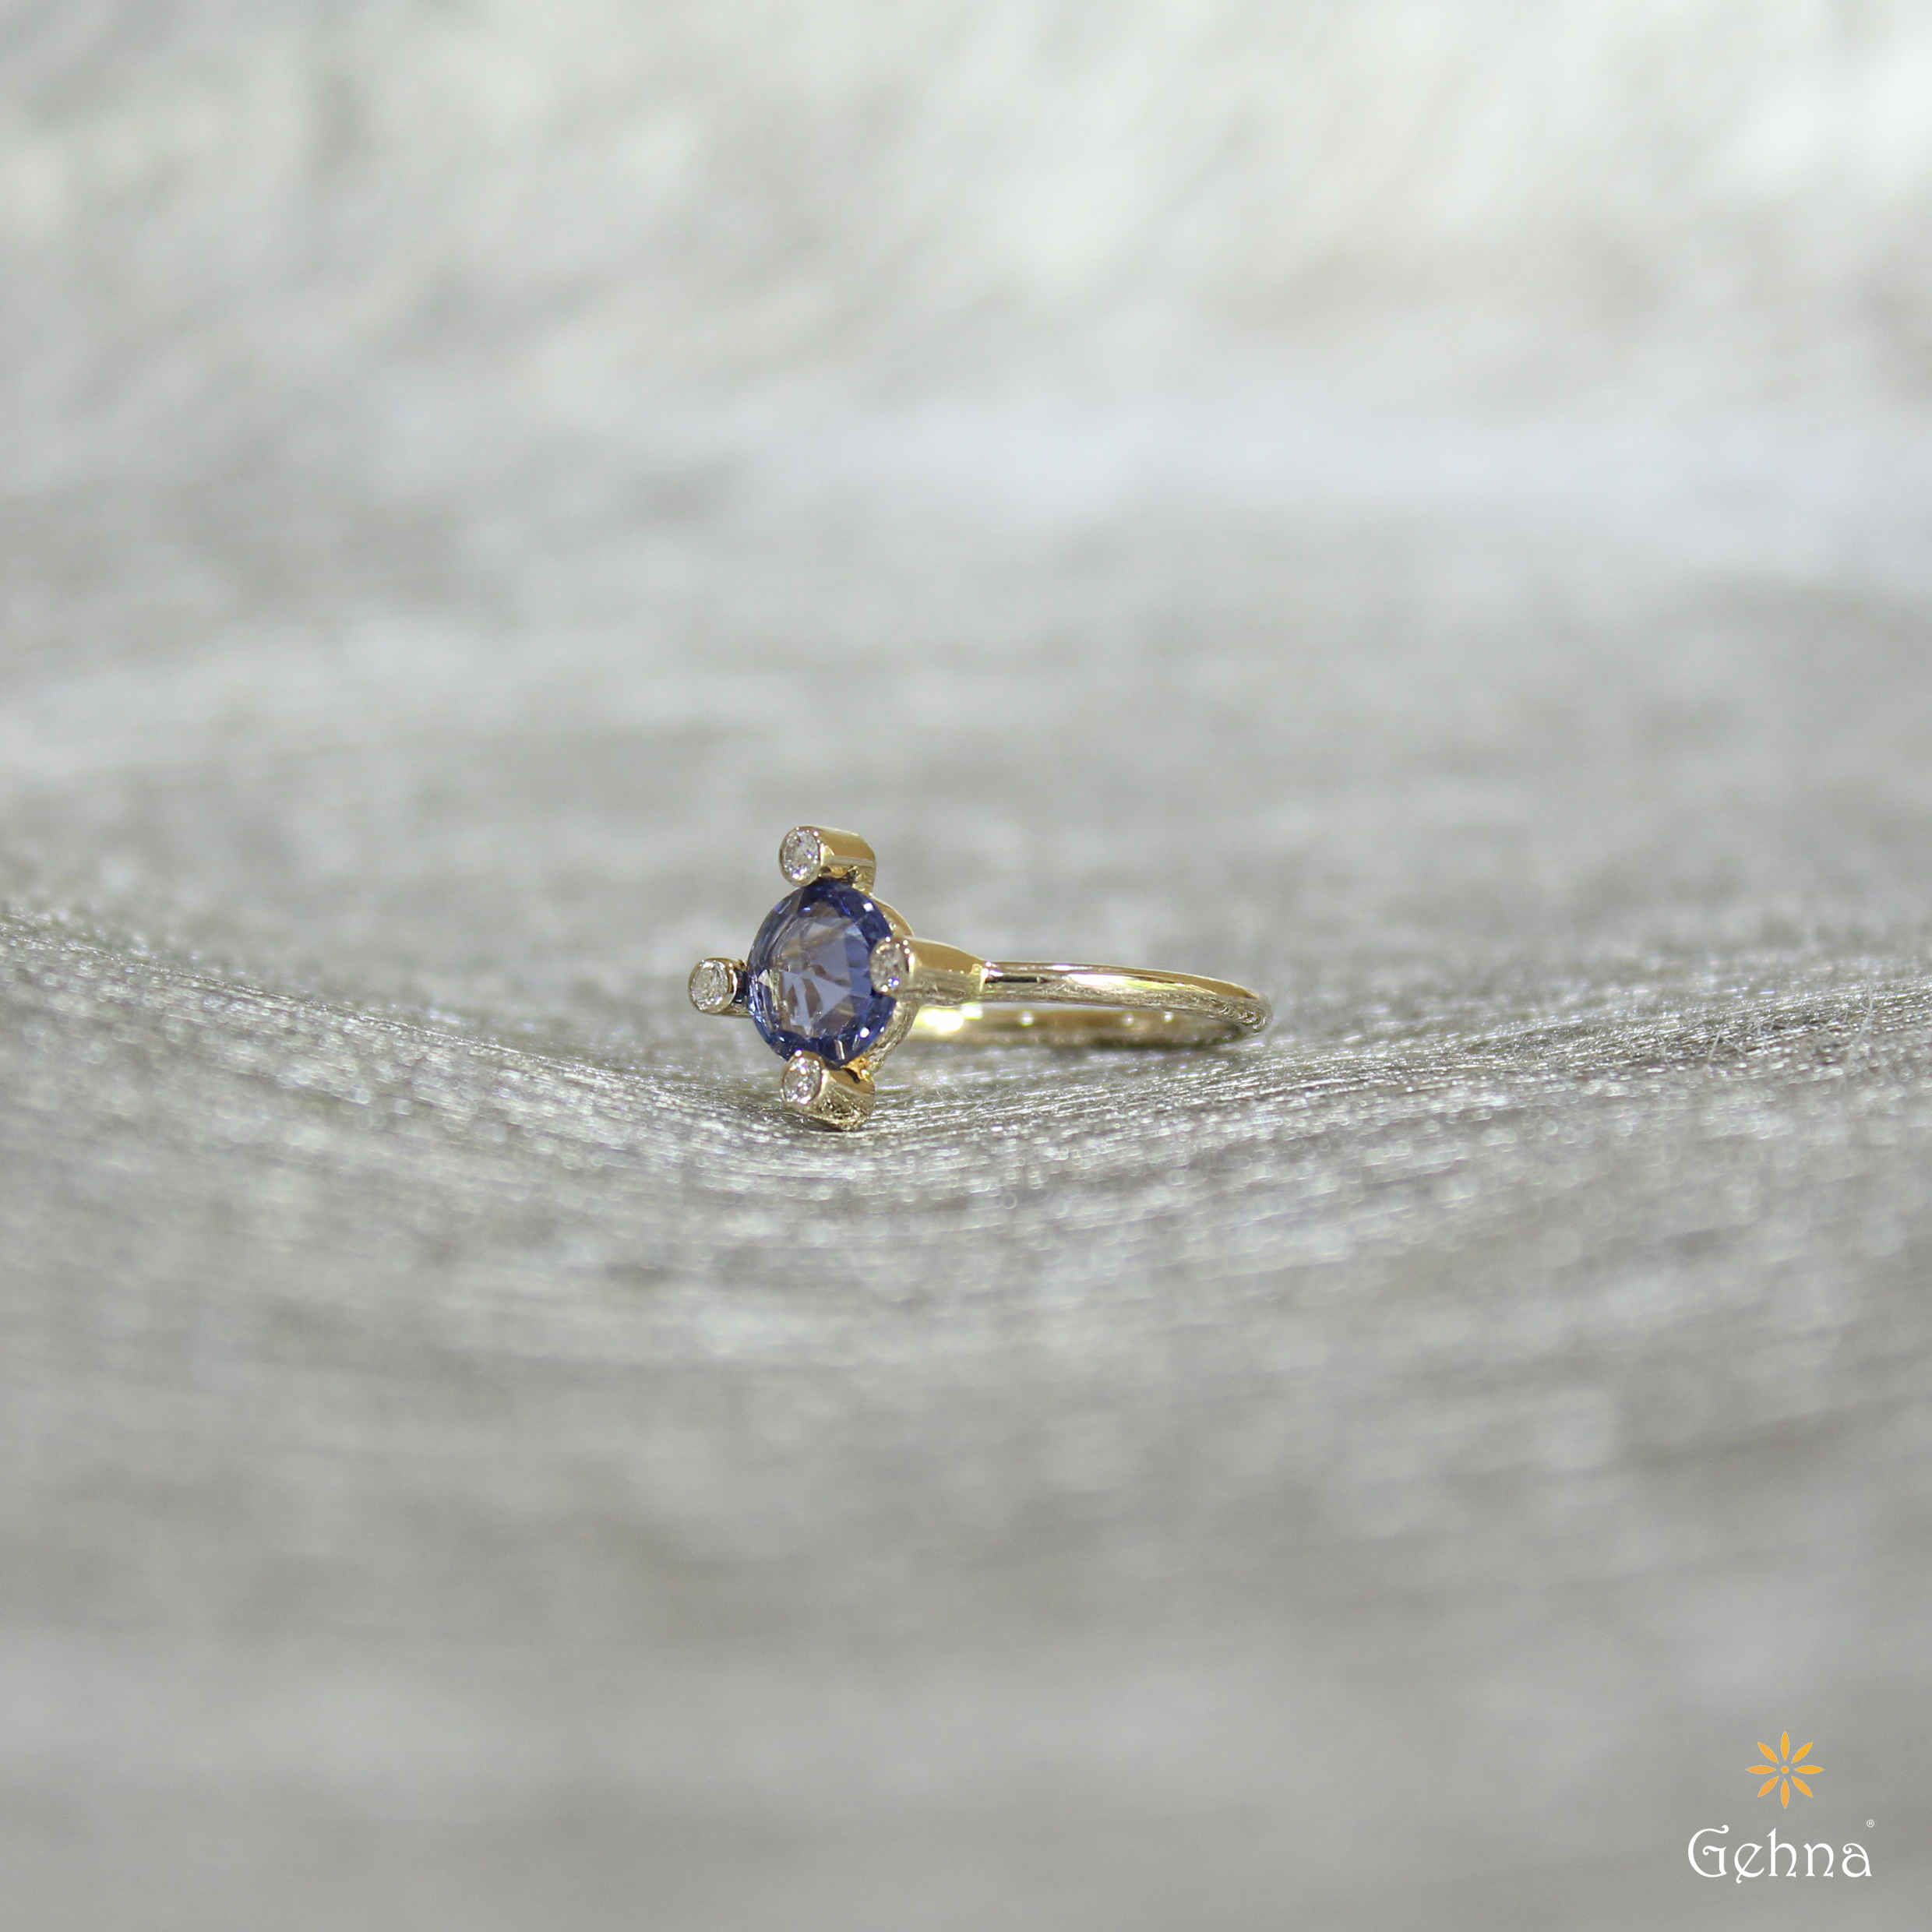 In sapphire rings and... - CaratLane: A Tanishq Partnership | Facebook